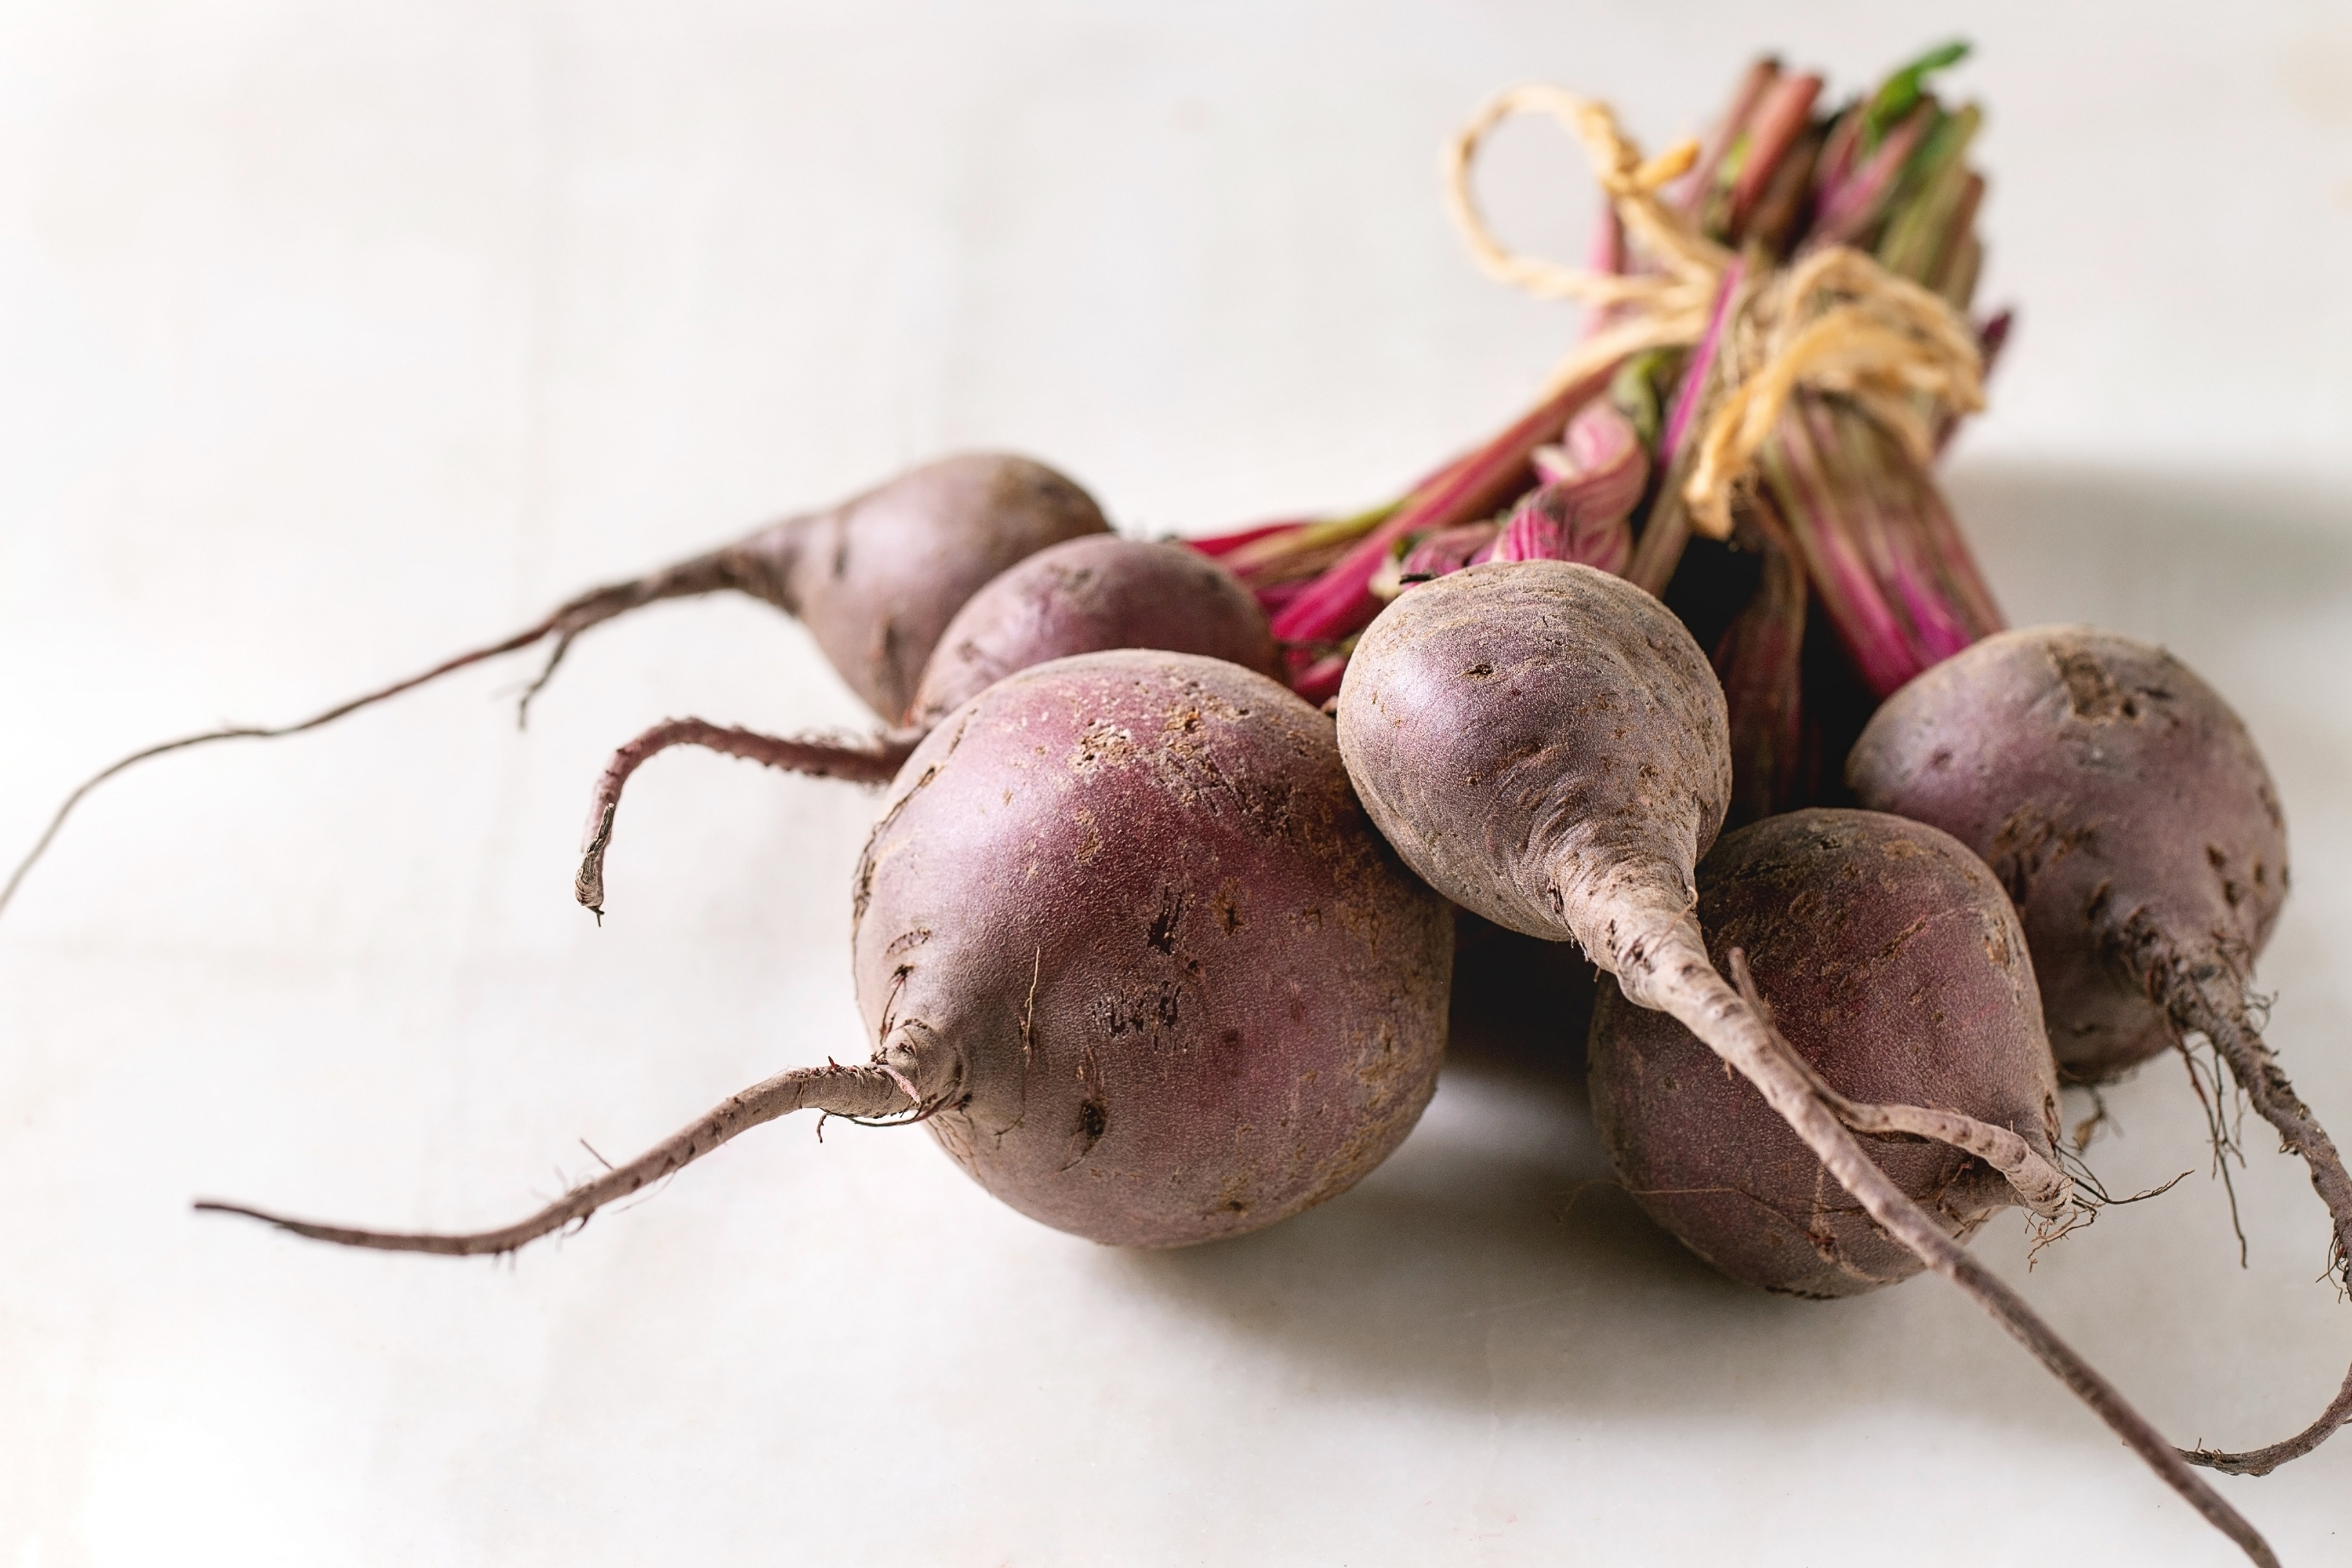 Bundle of young organic garden beetroot over white marble background.